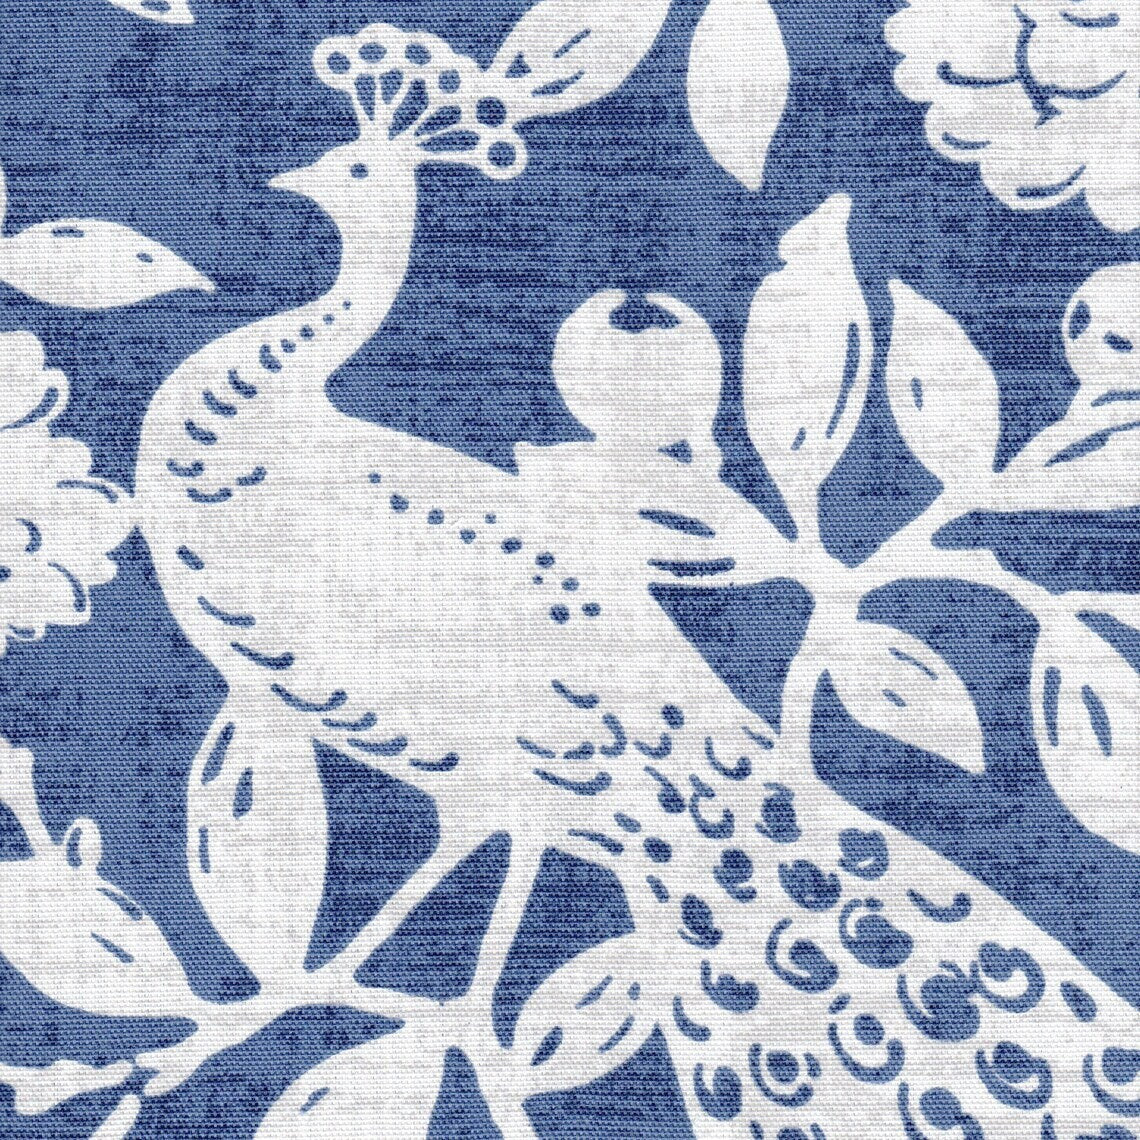 tab top curtain panels pair in birdsong navy blue bird toile, large scale